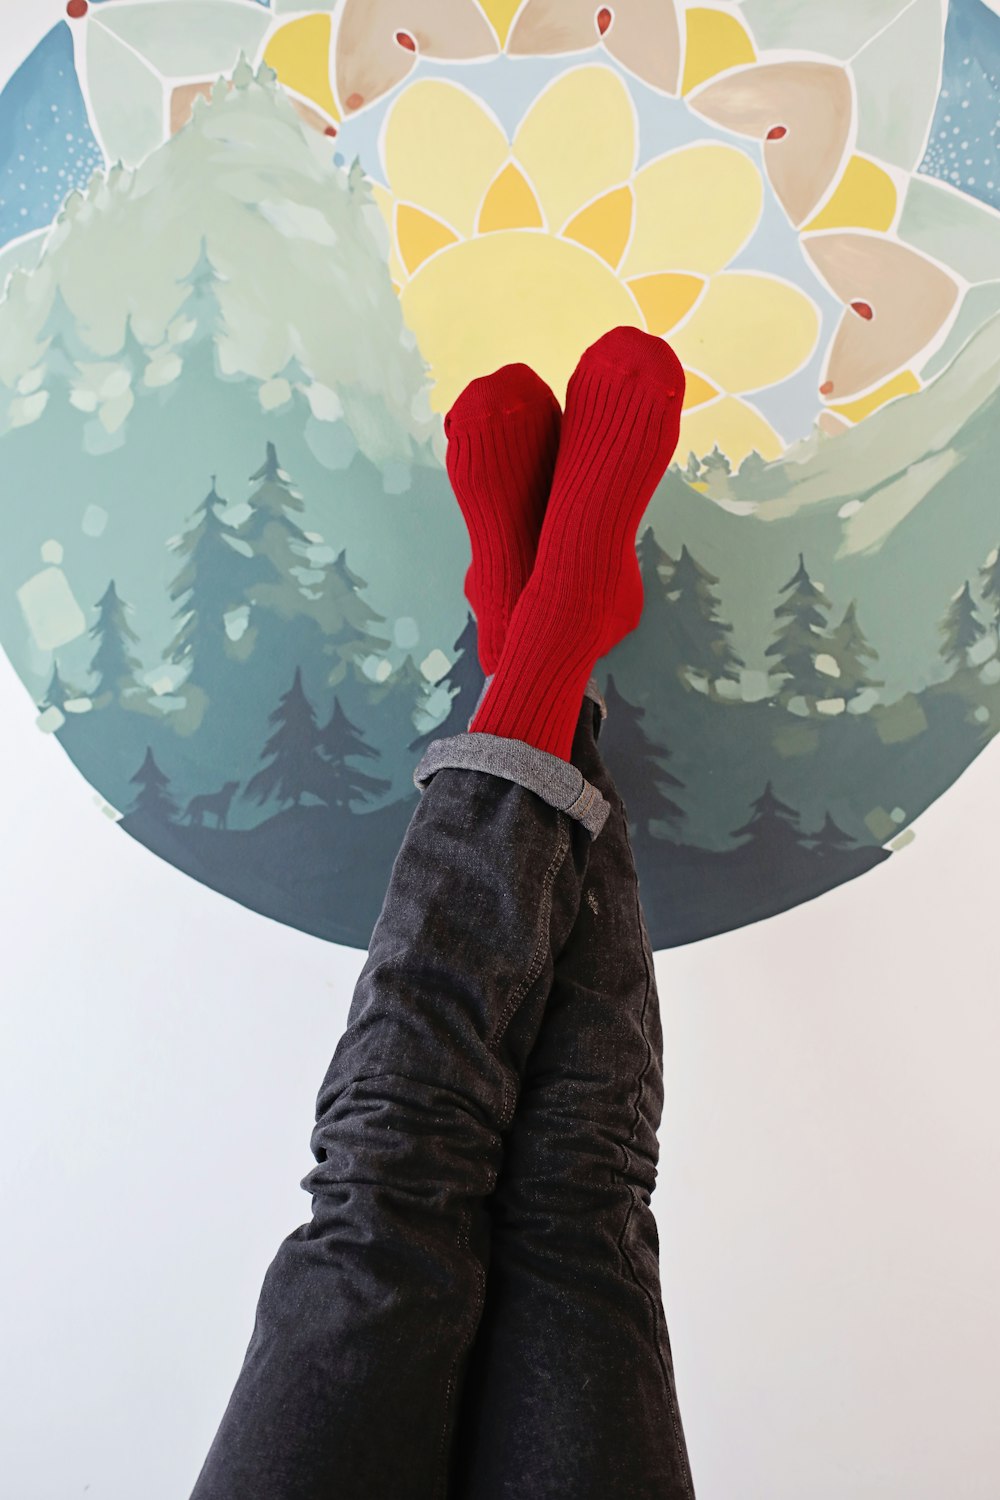 a person's feet with red socks and socks on